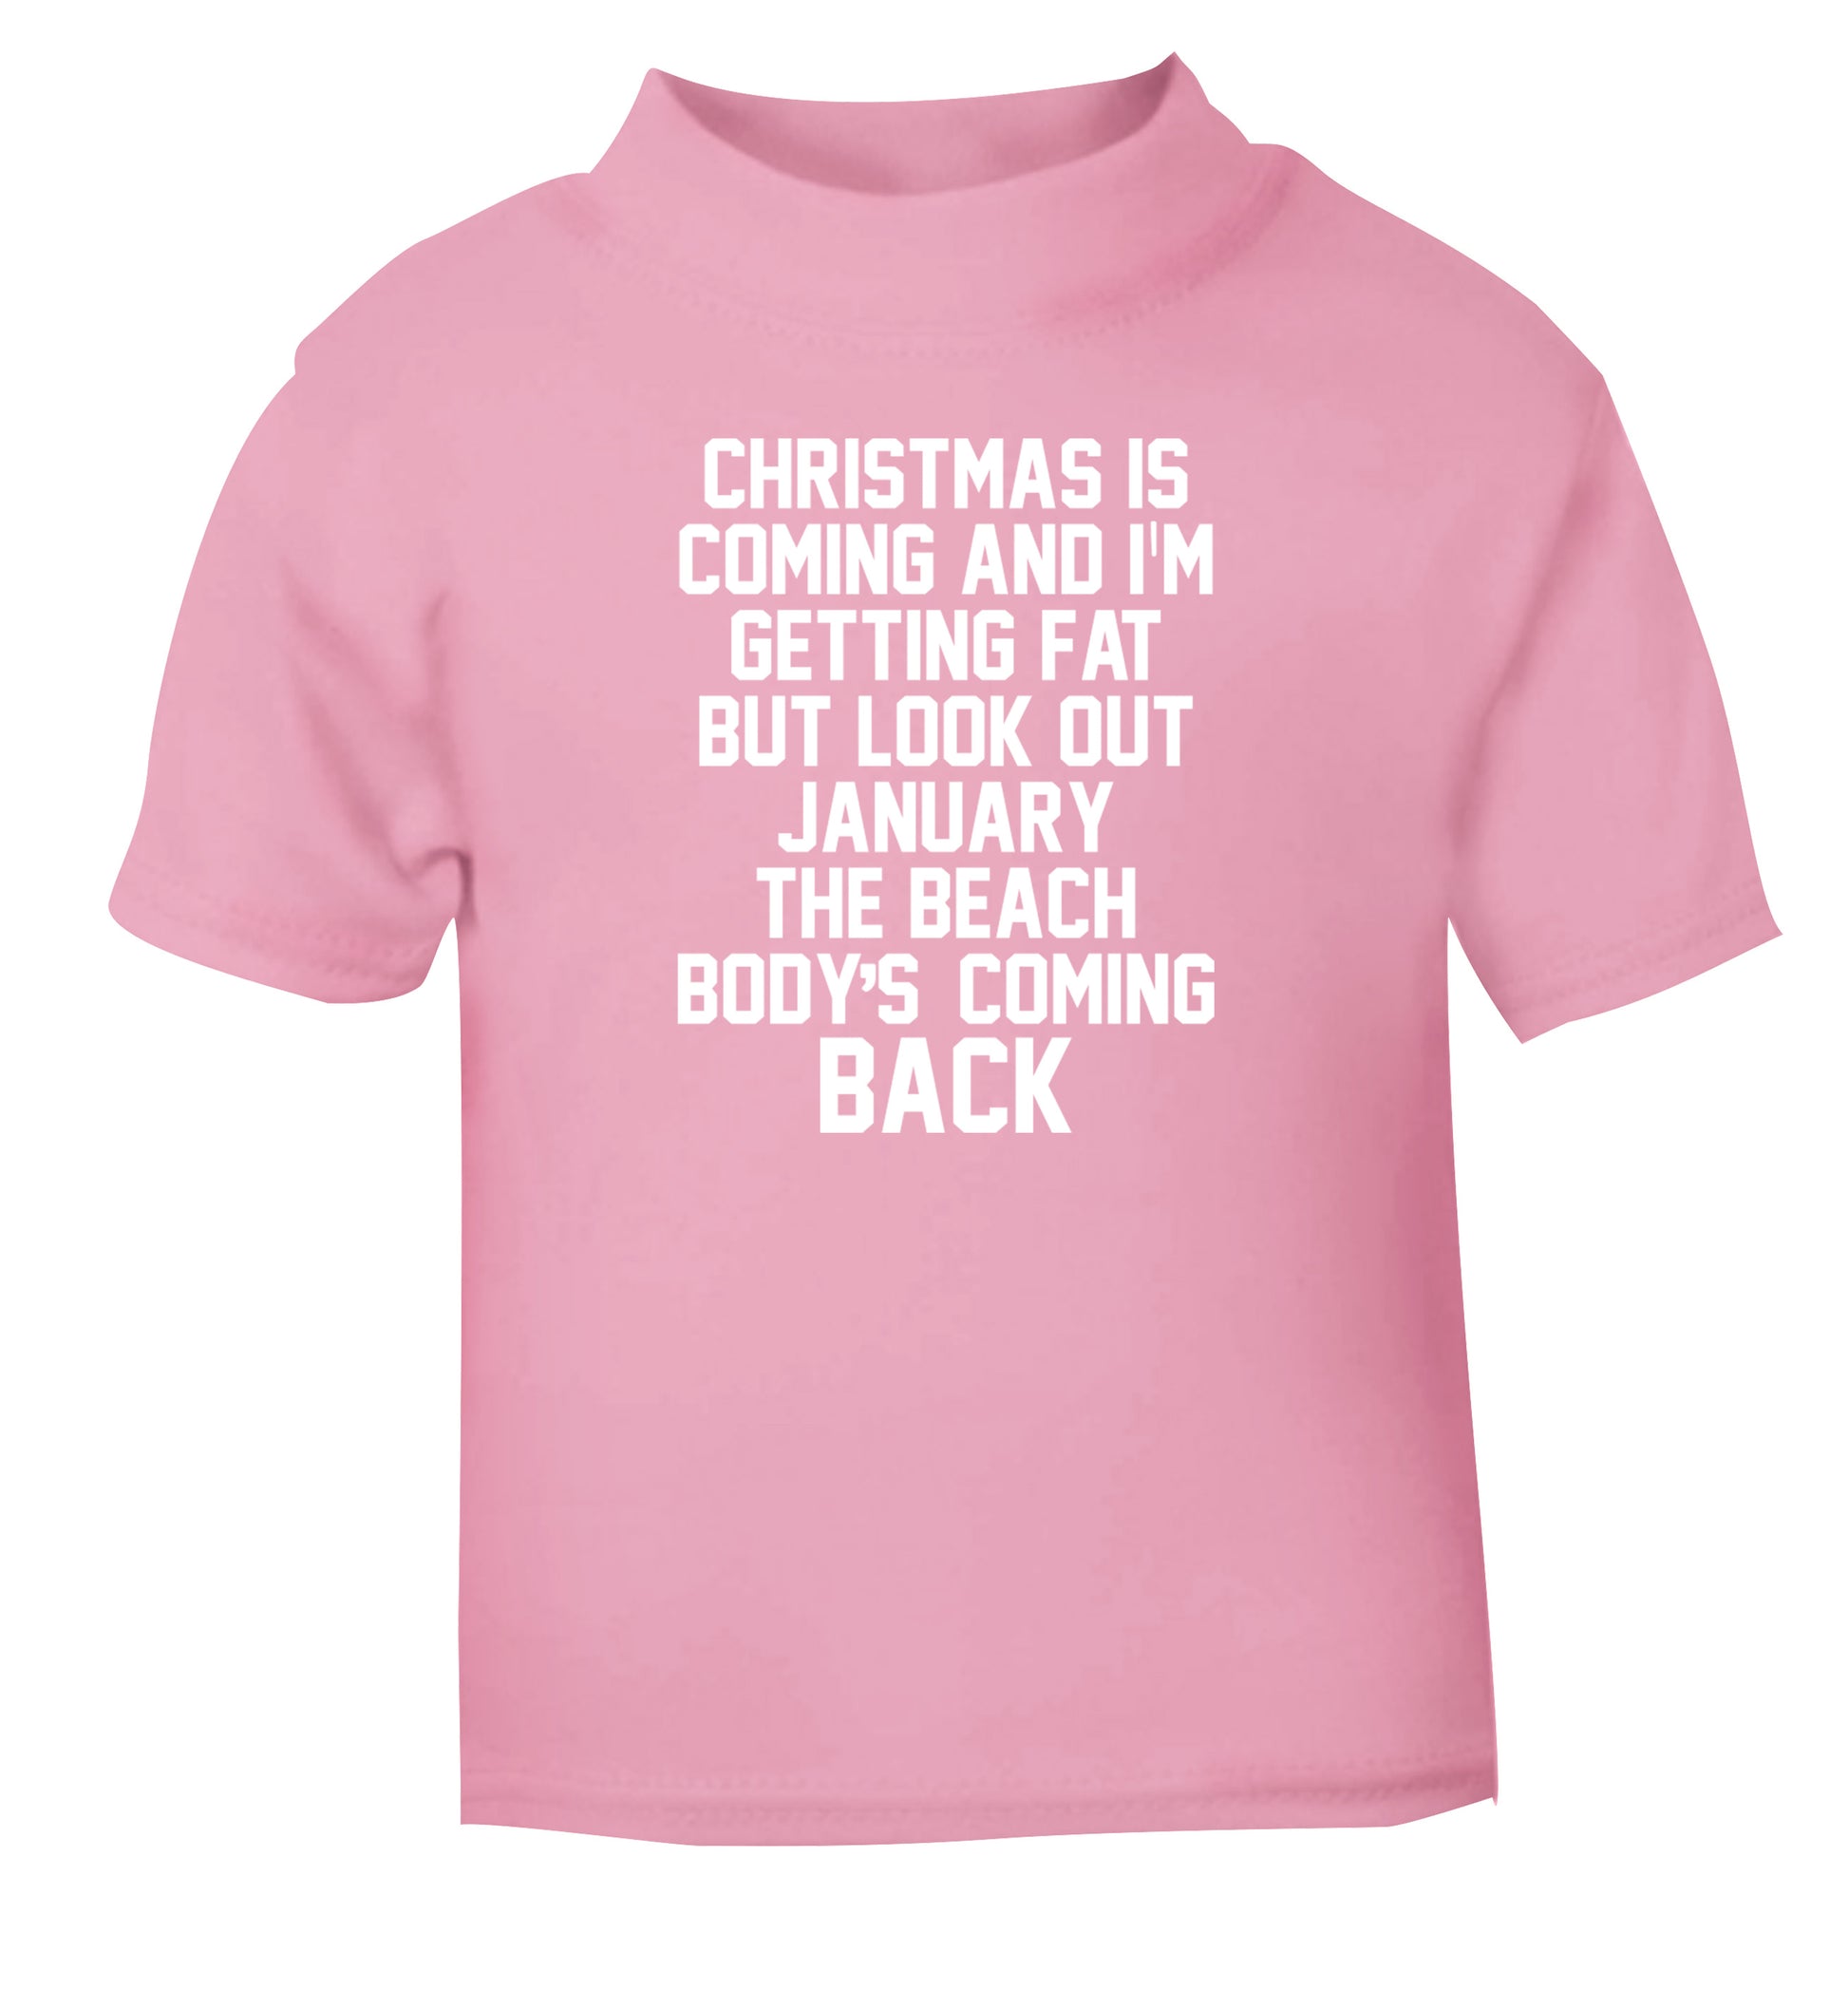 Christmas is coming and I'm getting fat but look out January the beach body's coming back! light pink Baby Toddler Tshirt 2 Years